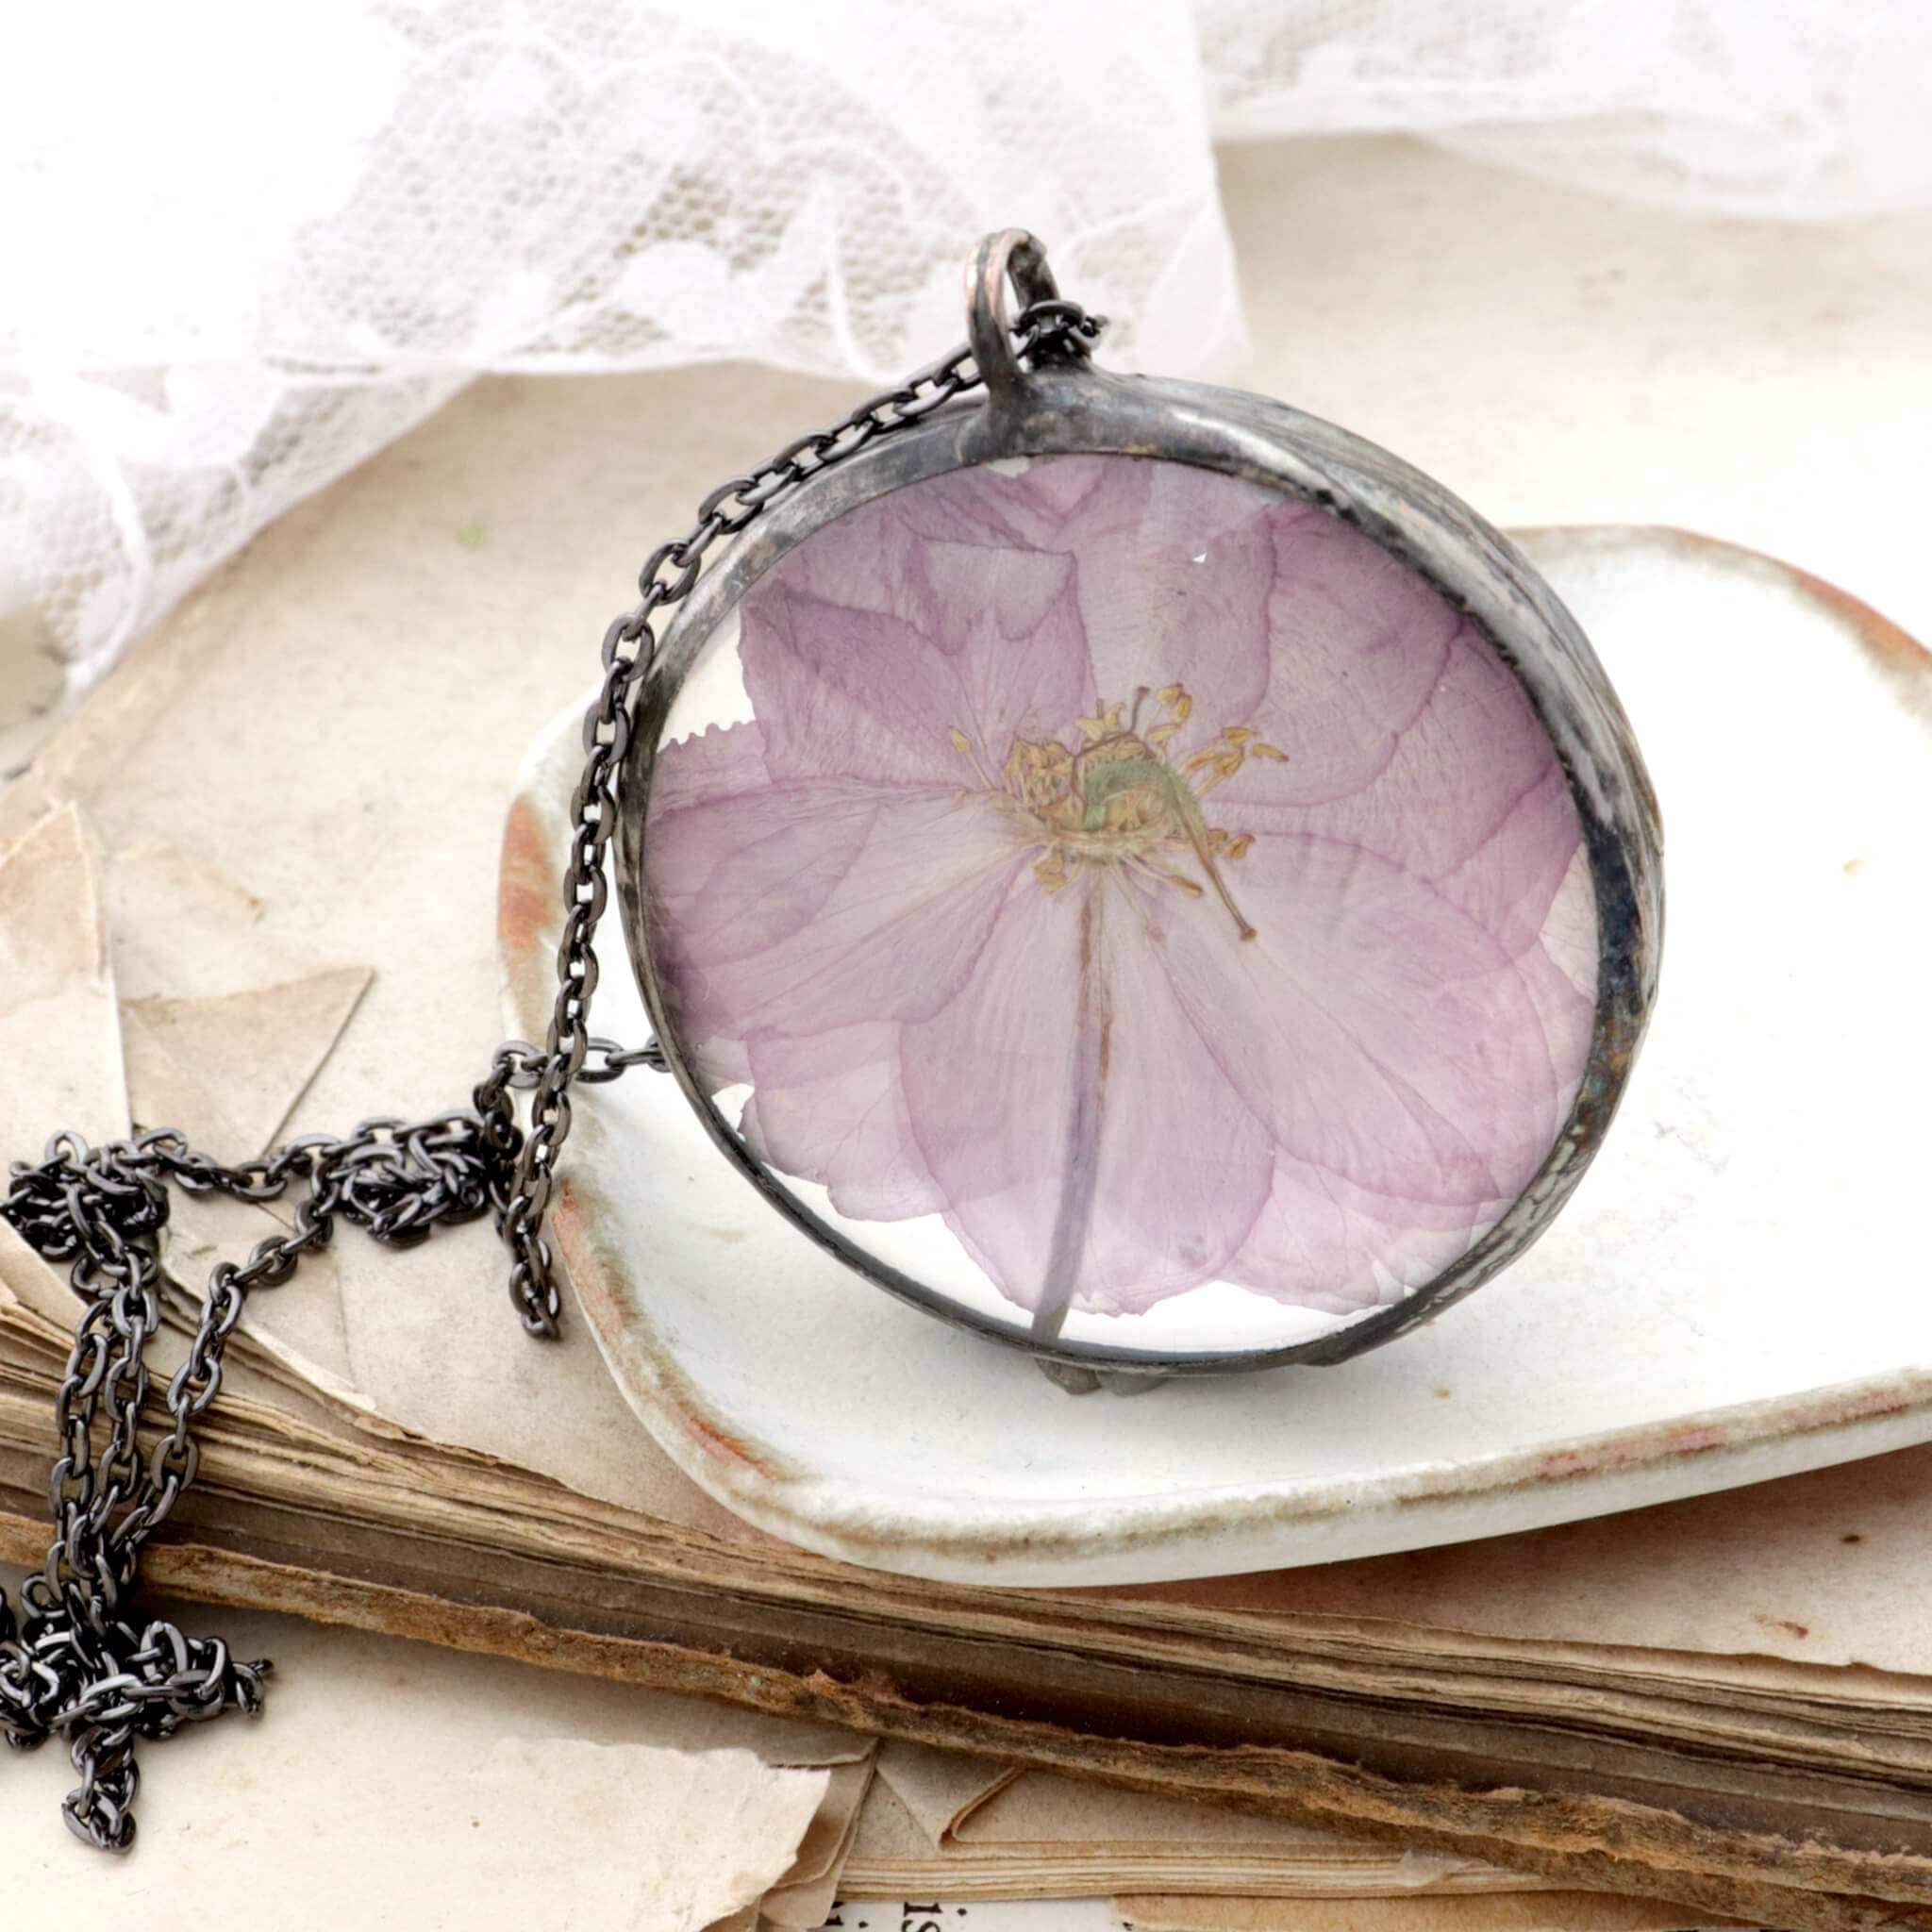 Round cherry blossom necklace standing on the edge on an old book